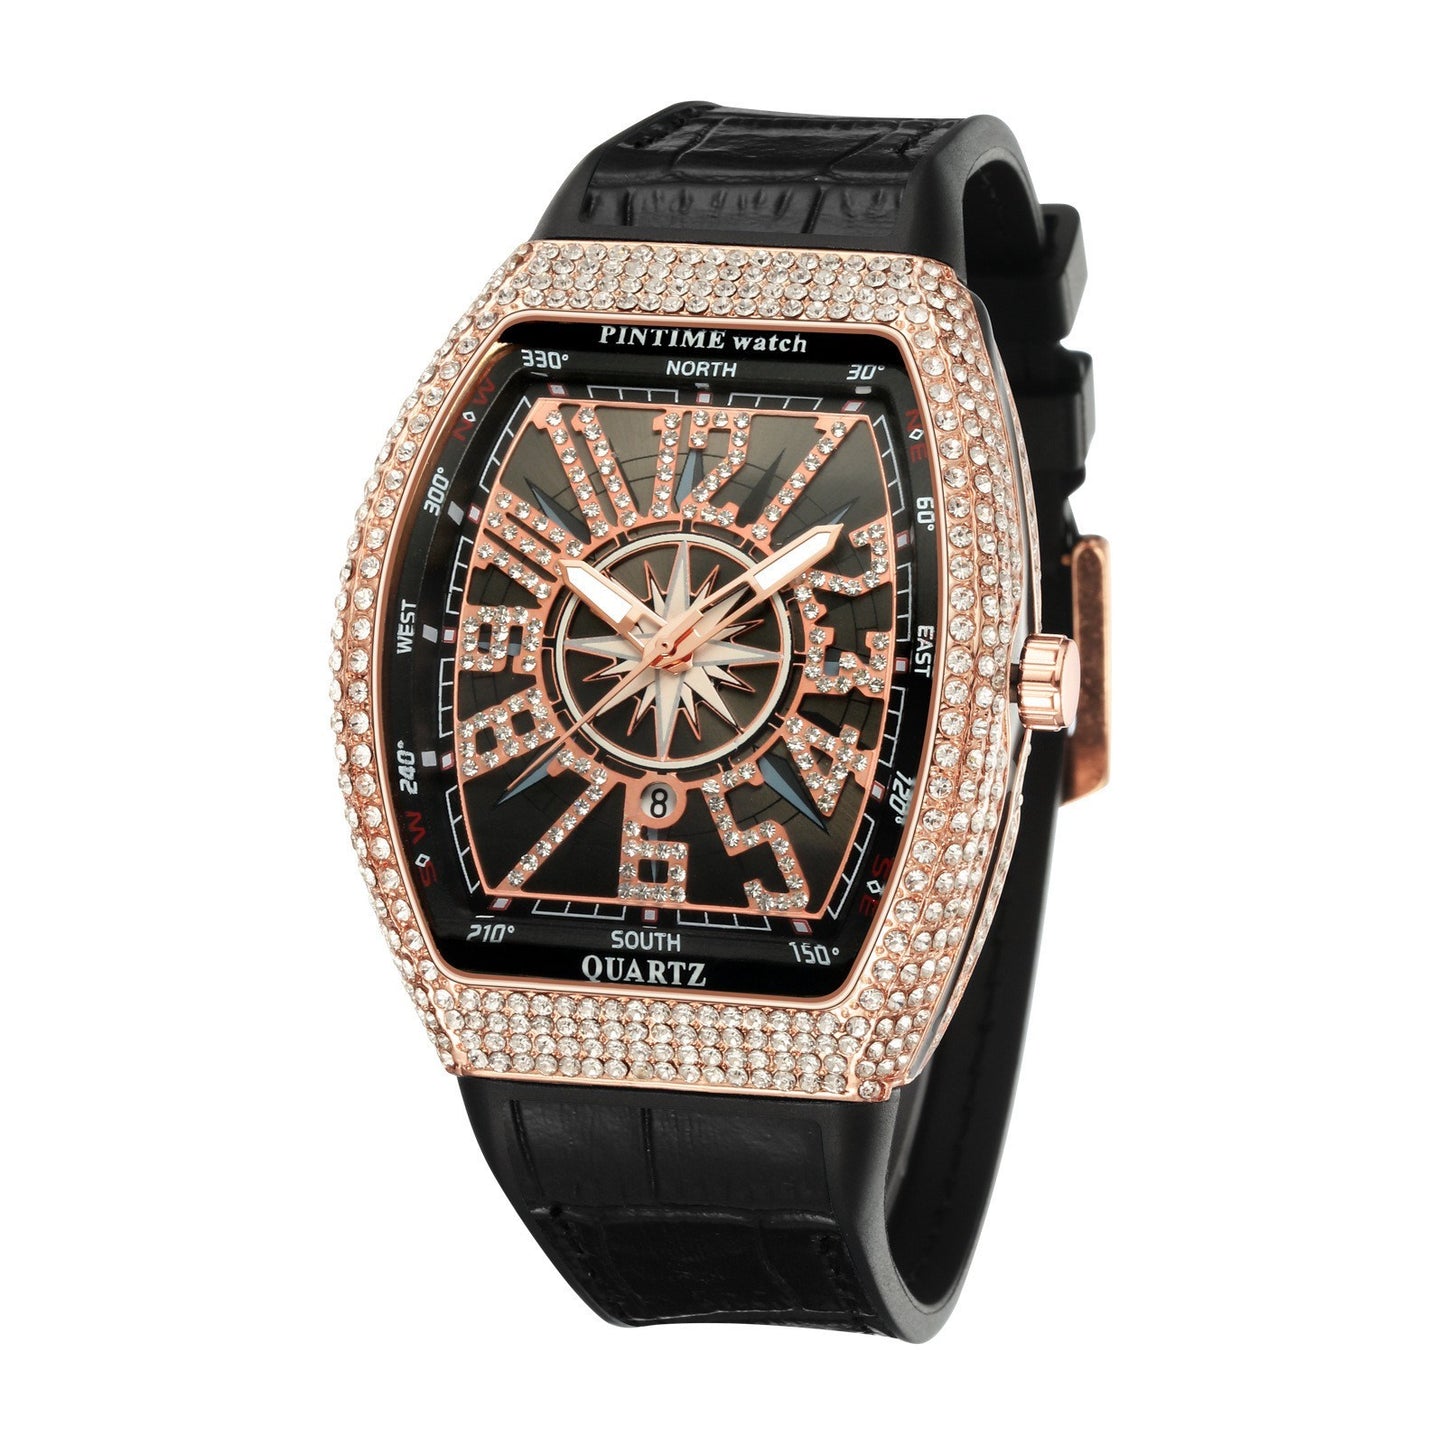 Men's Fashion Cool Unique Watch Iced Out Bling Crystal Rhinestone Quartz Wrist Watches With Rubber Strap